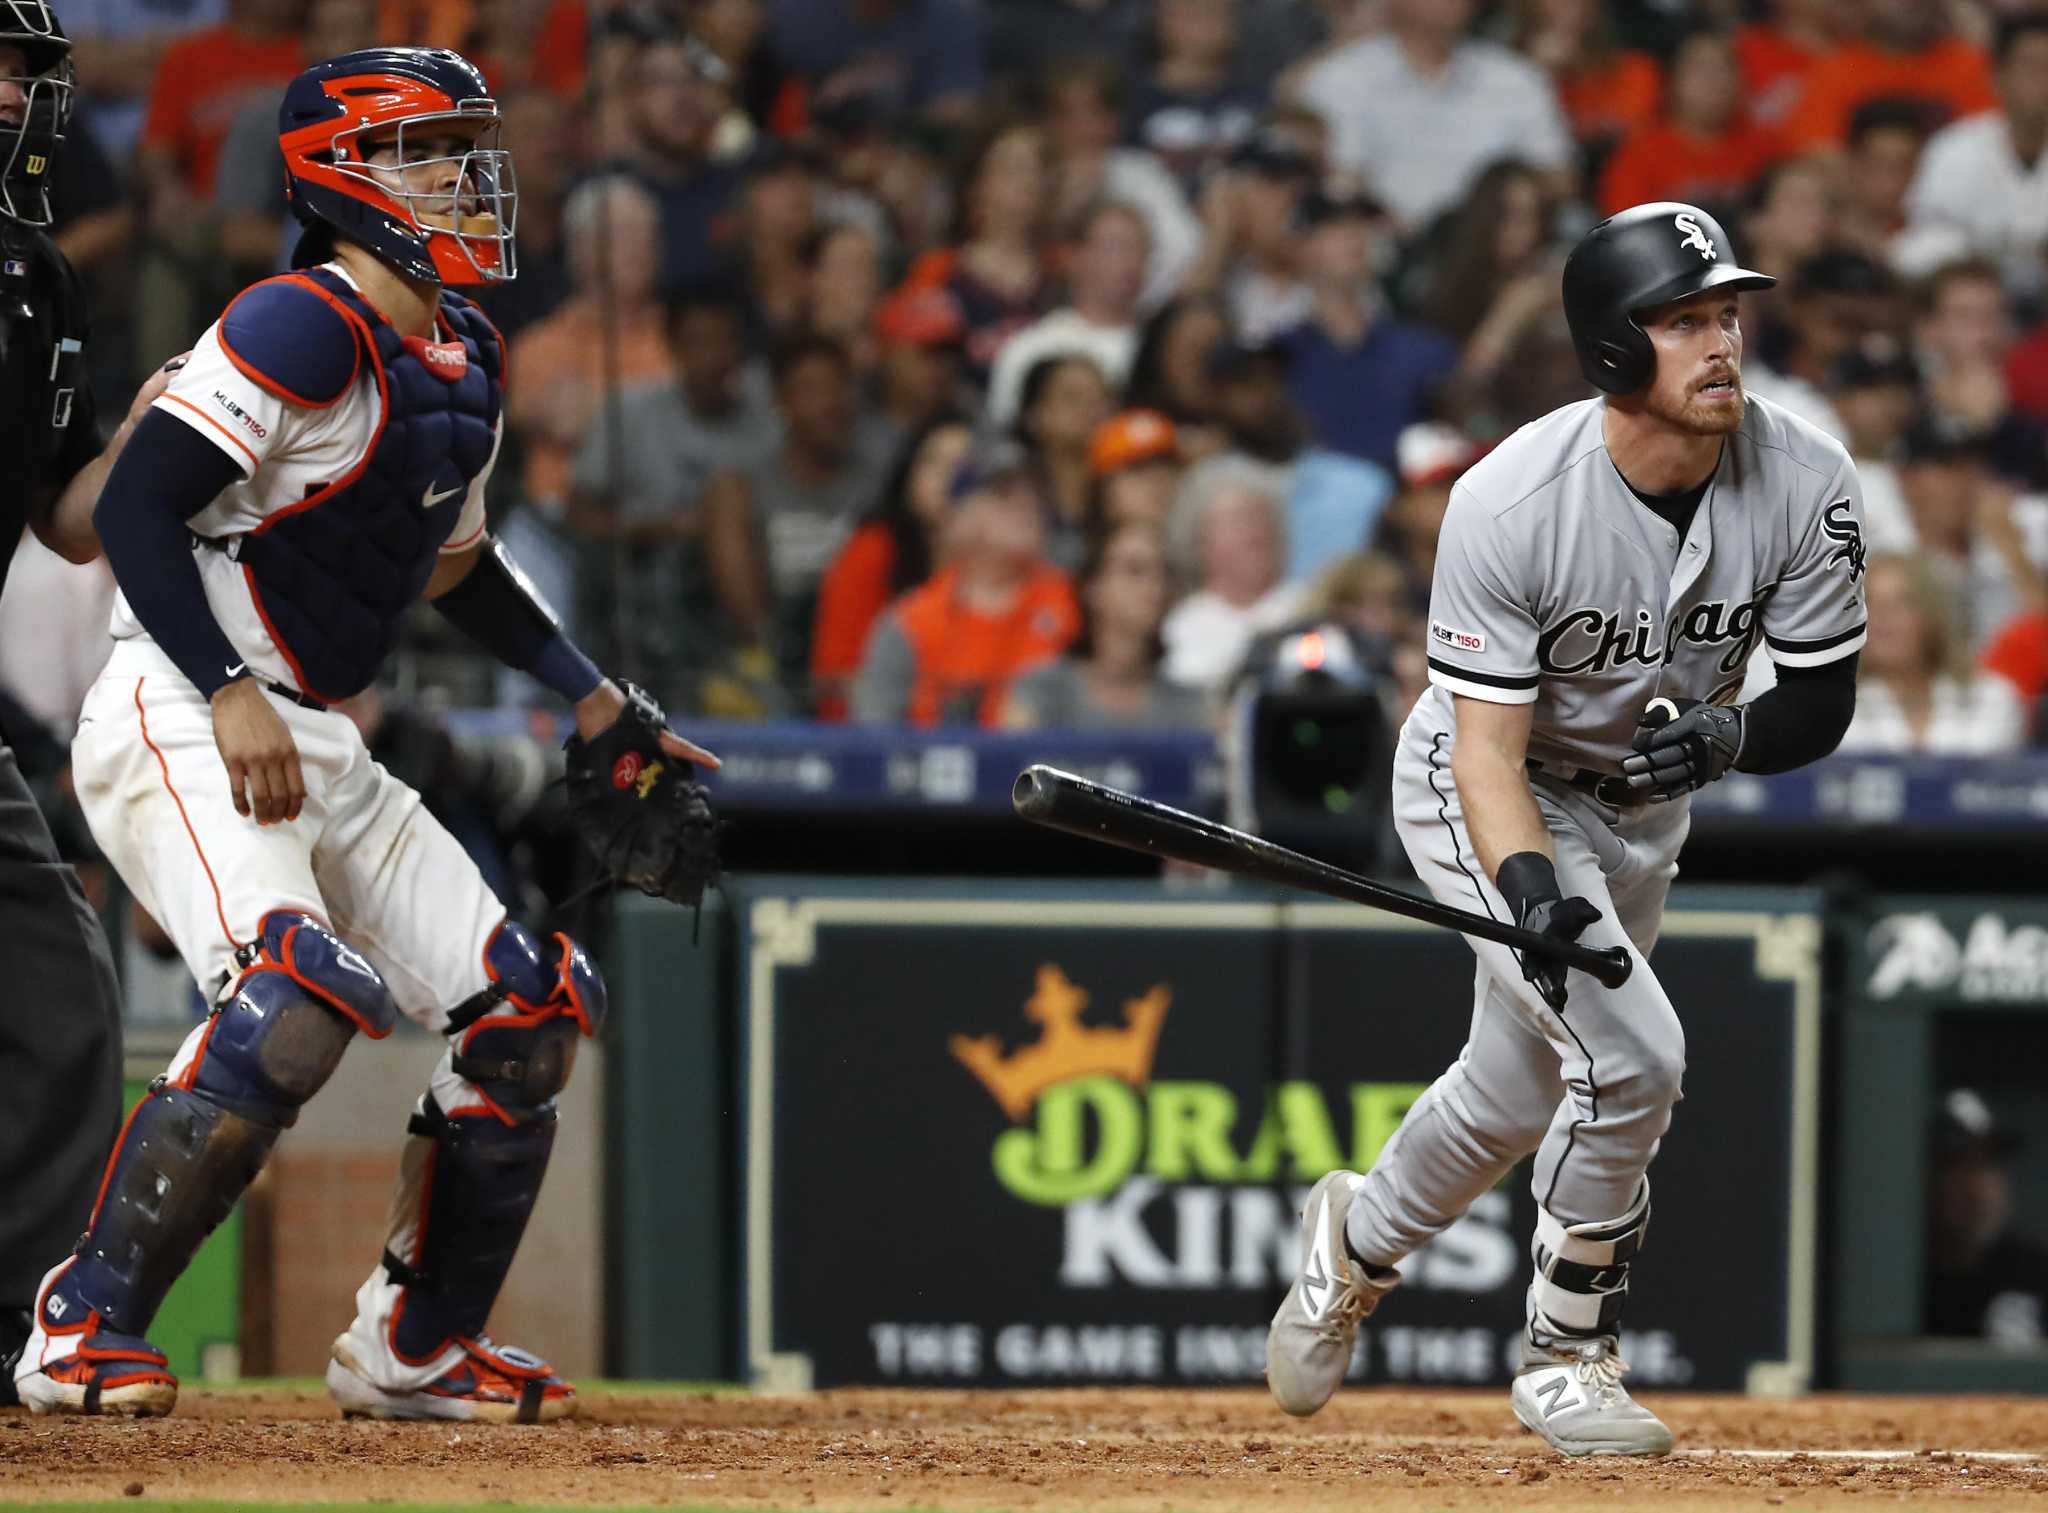 Bats boom again as White Sox win second straight over Guardians